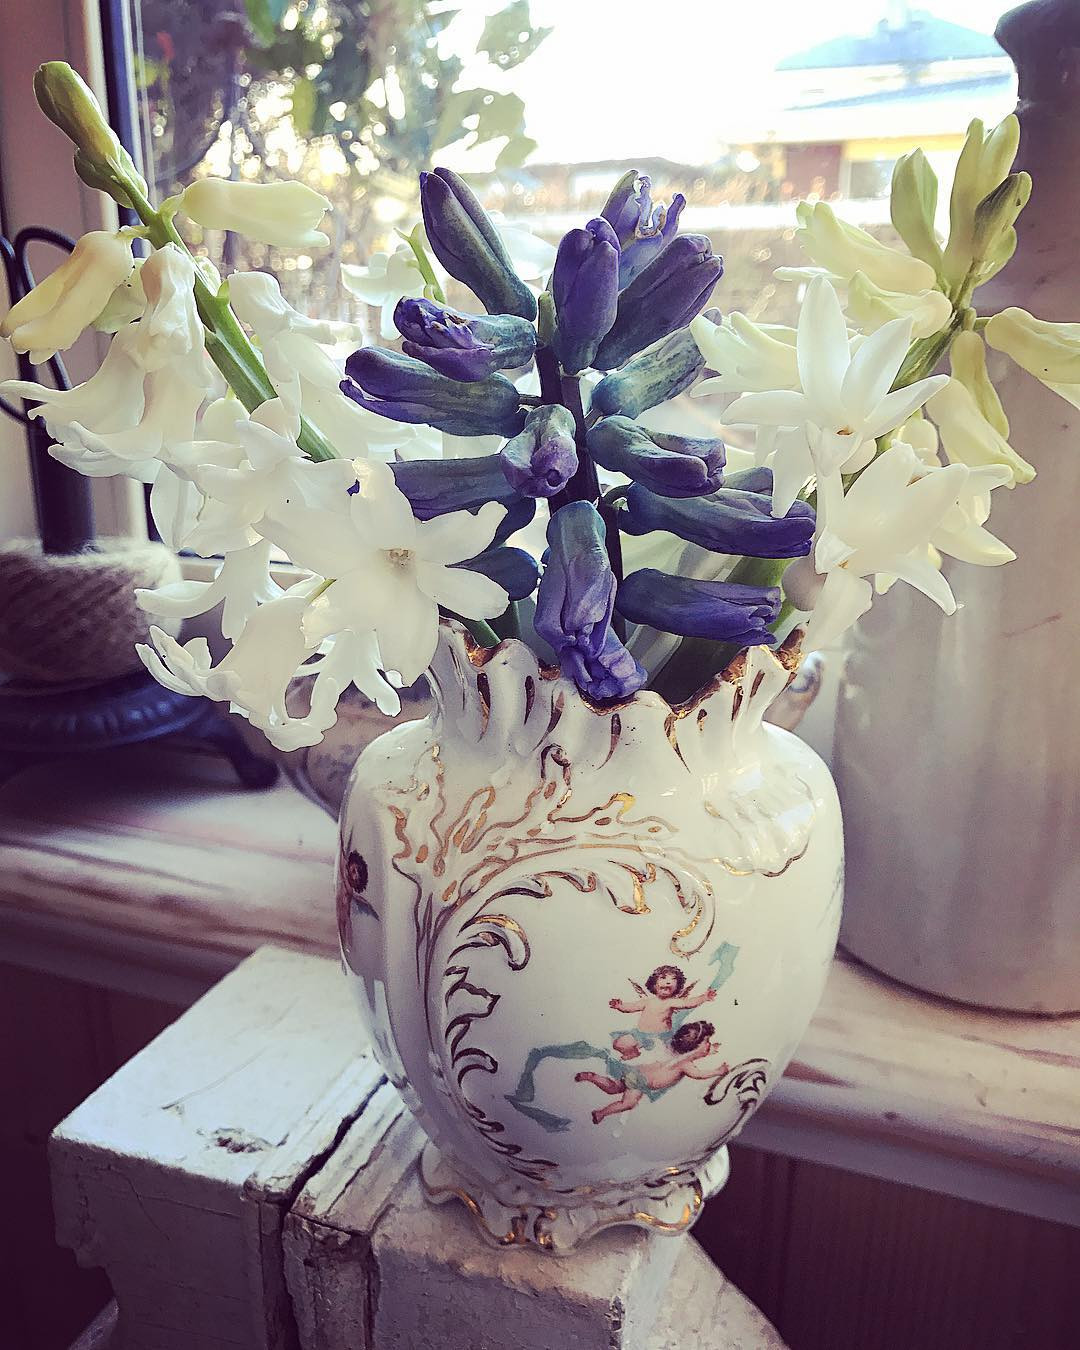 12 Lovely Alvar Aalto Vase Price 2023 free download alvar aalto vase price of oldvase hash tags deskgram in my favourite chippy old vase with my favourite spring flowers from my garden bought the